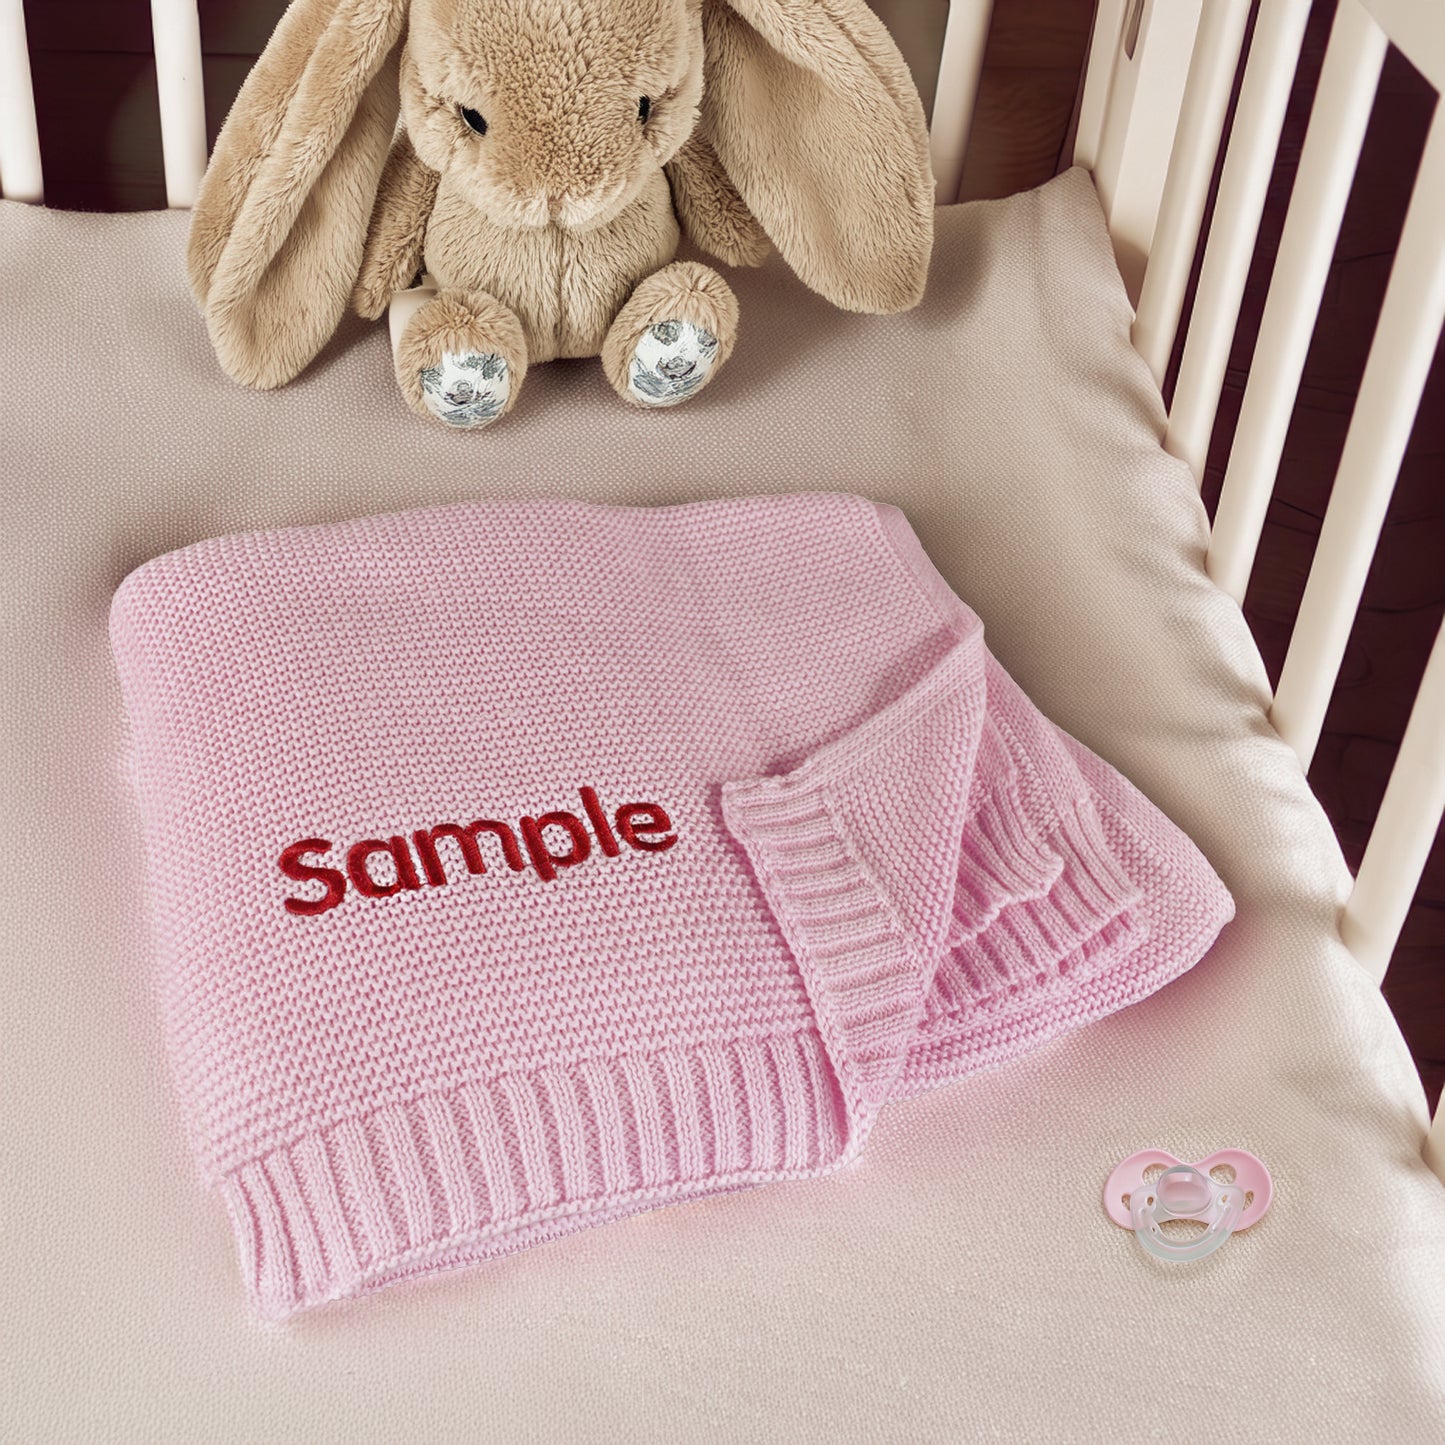 Knitted Baby Blanket with Embroidered Personalized Name